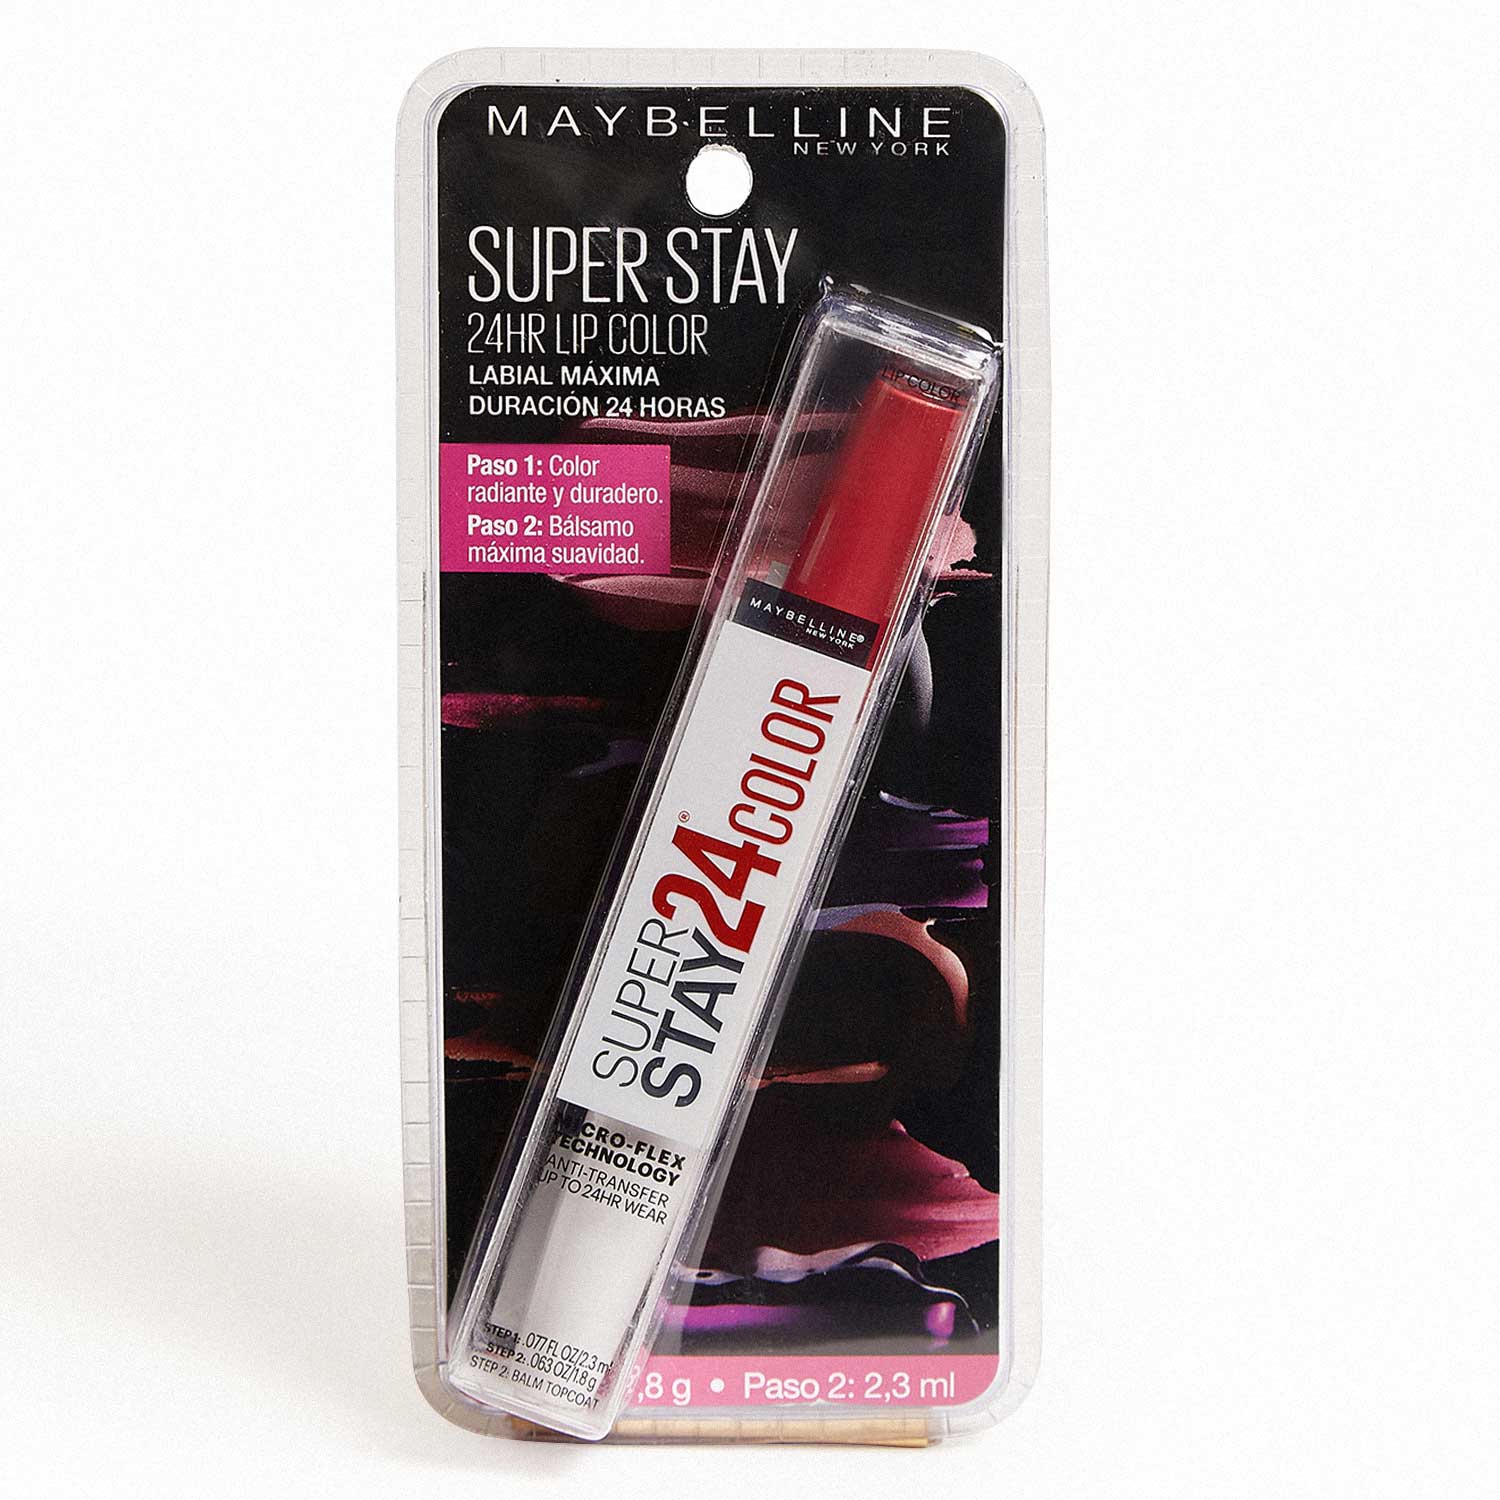 Lab Maybelline Ss 24hr Continuos Bl